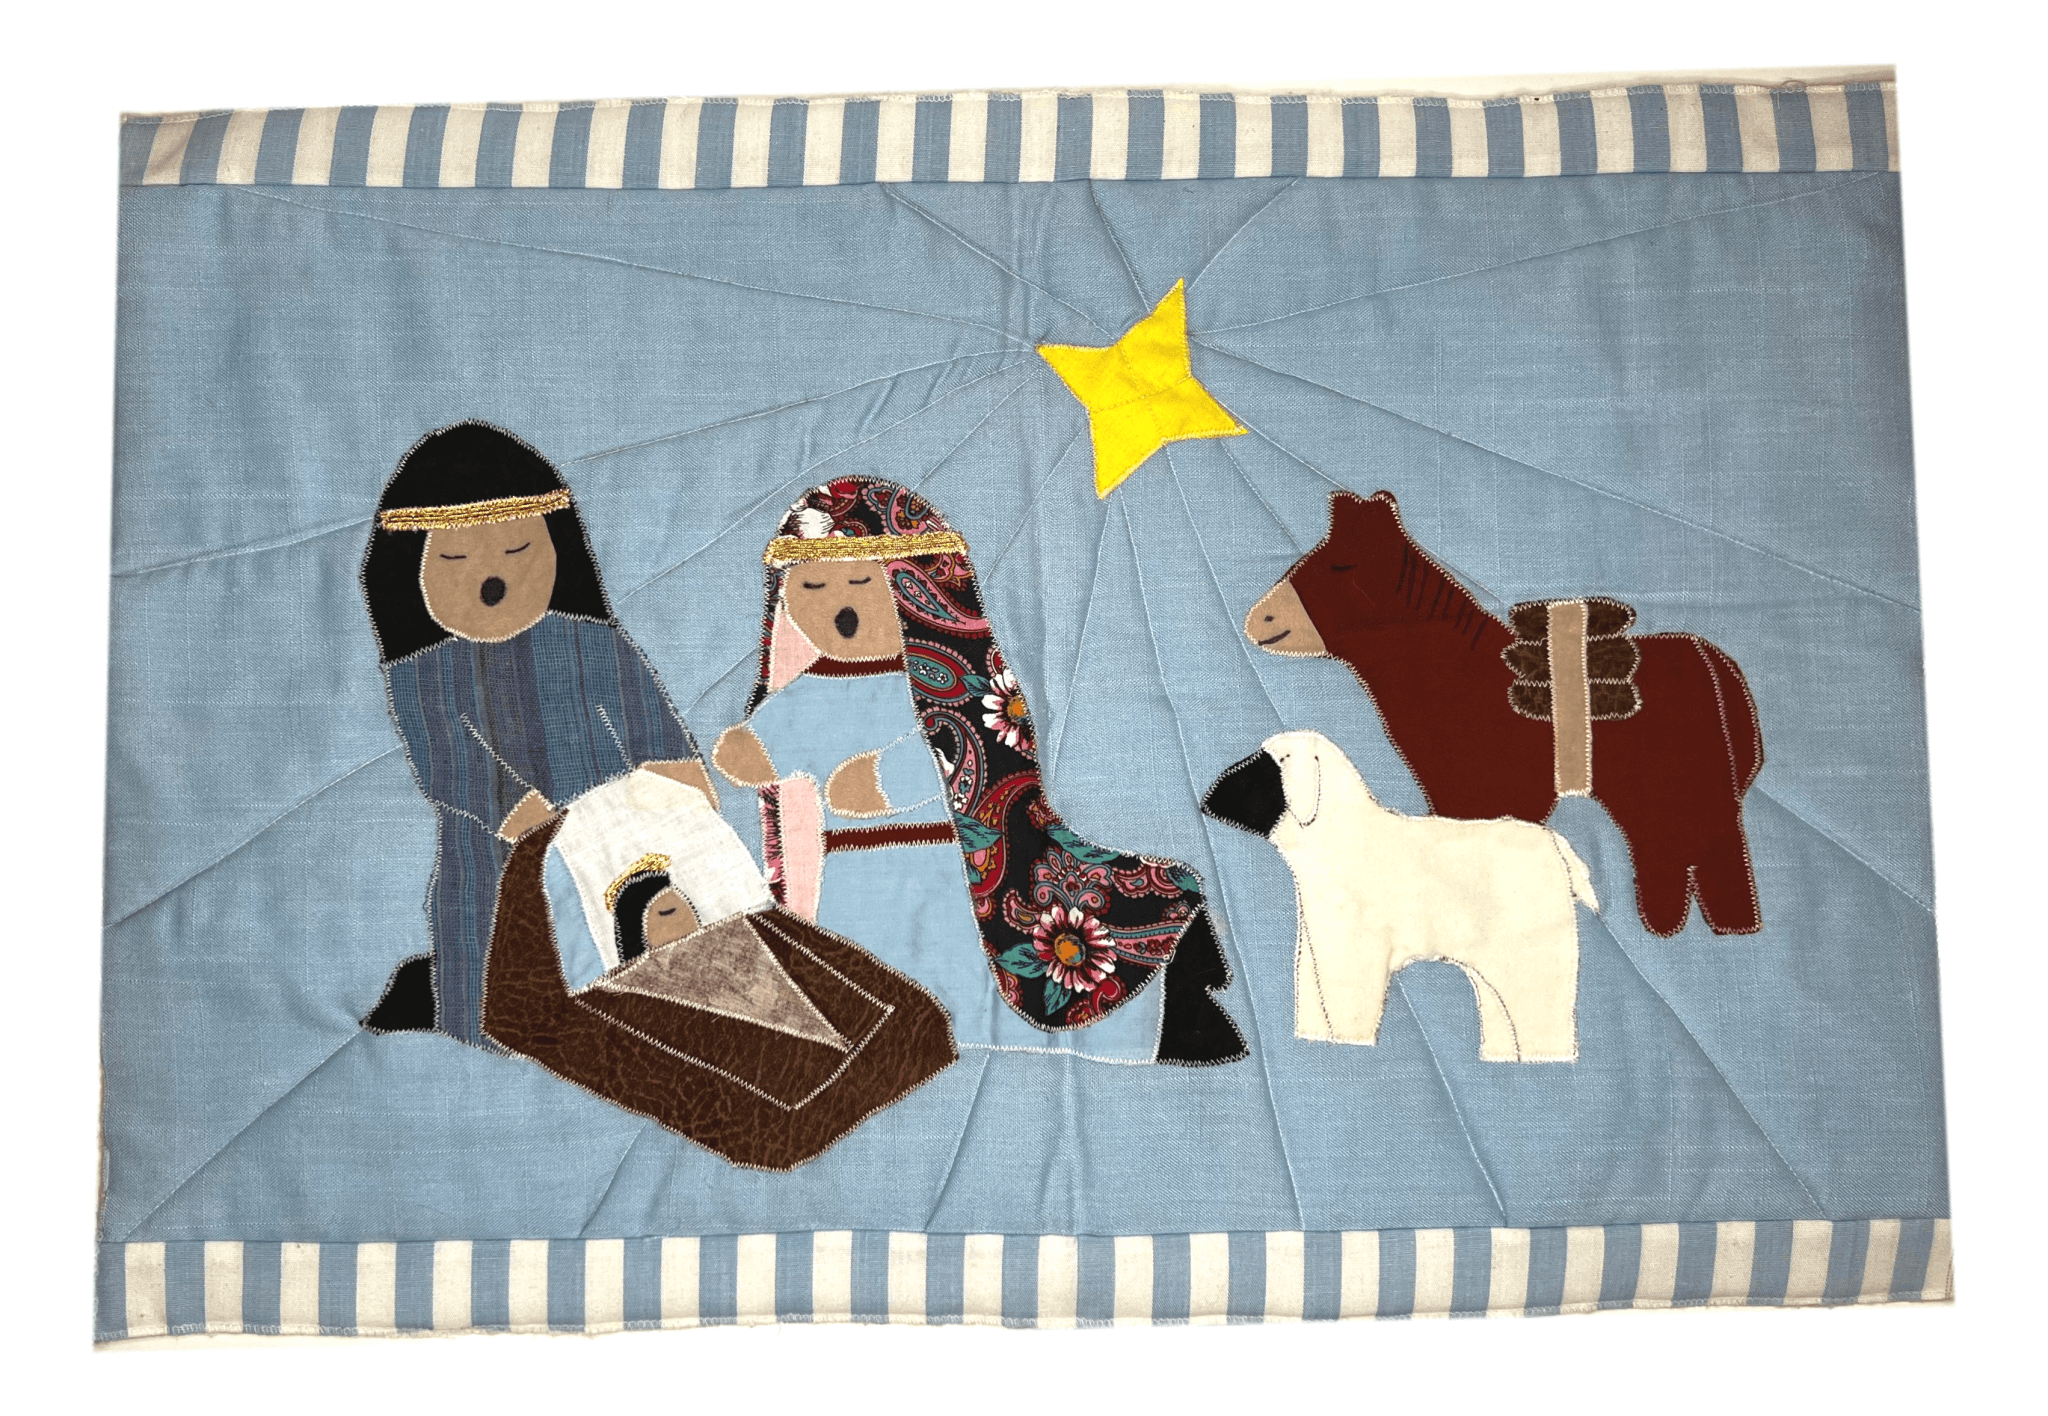 Tapestry Nativity Handstitched Locally L: 25 inches X W: 16 inches - Ysleta Mission Gift Shop- VOTED 2022 El Paso's Best Gift Shop